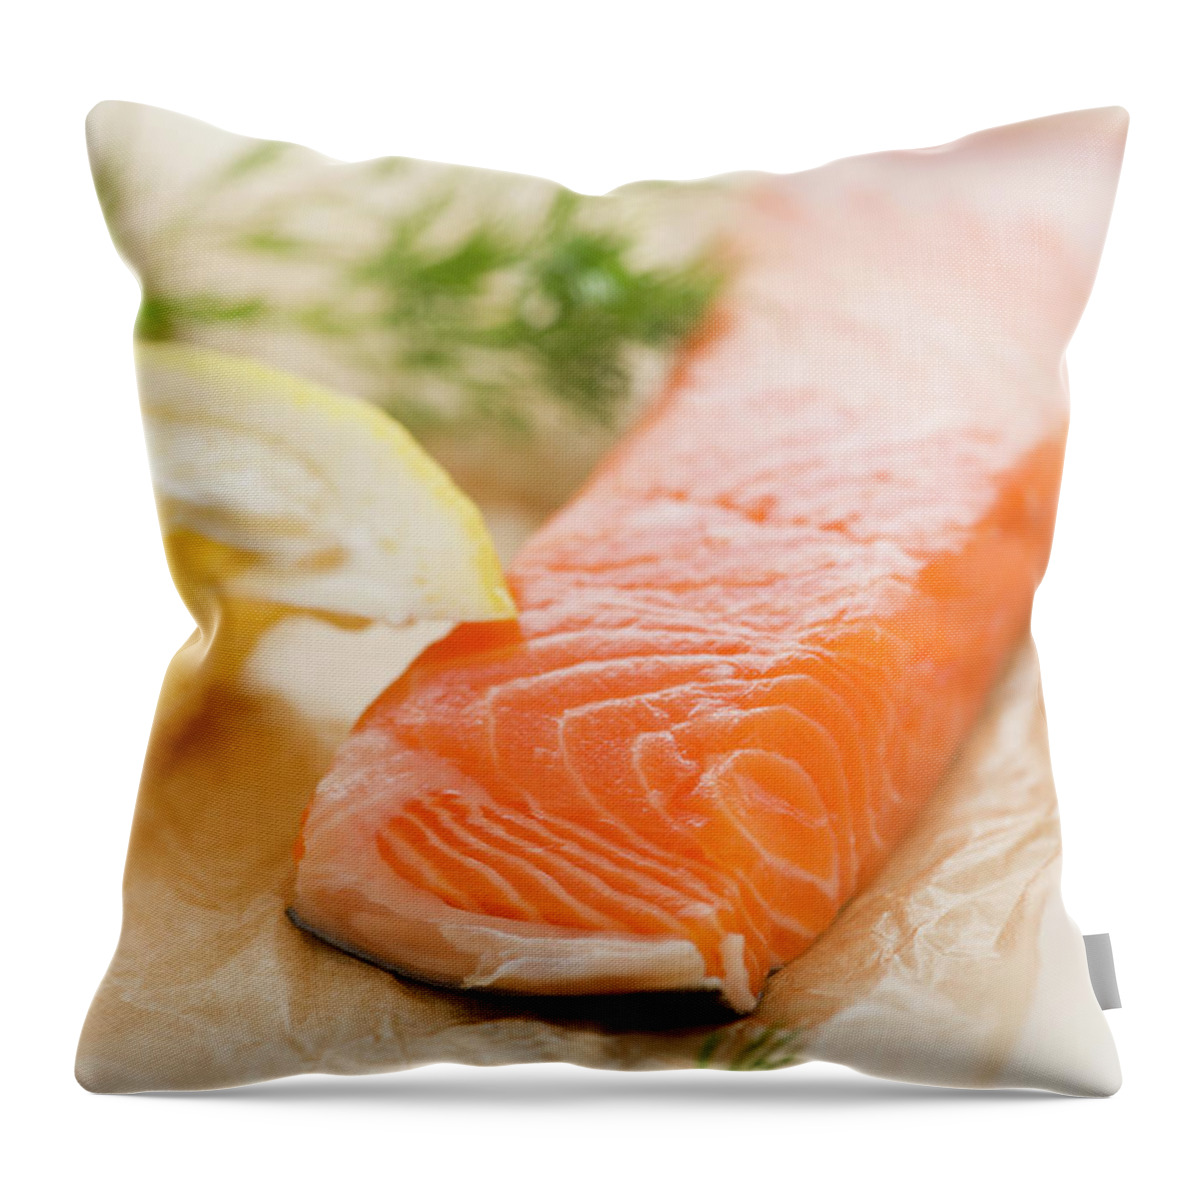 Close-up Throw Pillow featuring the photograph Close Up Of Salmon Meat With Lemon And by Jamie Grill